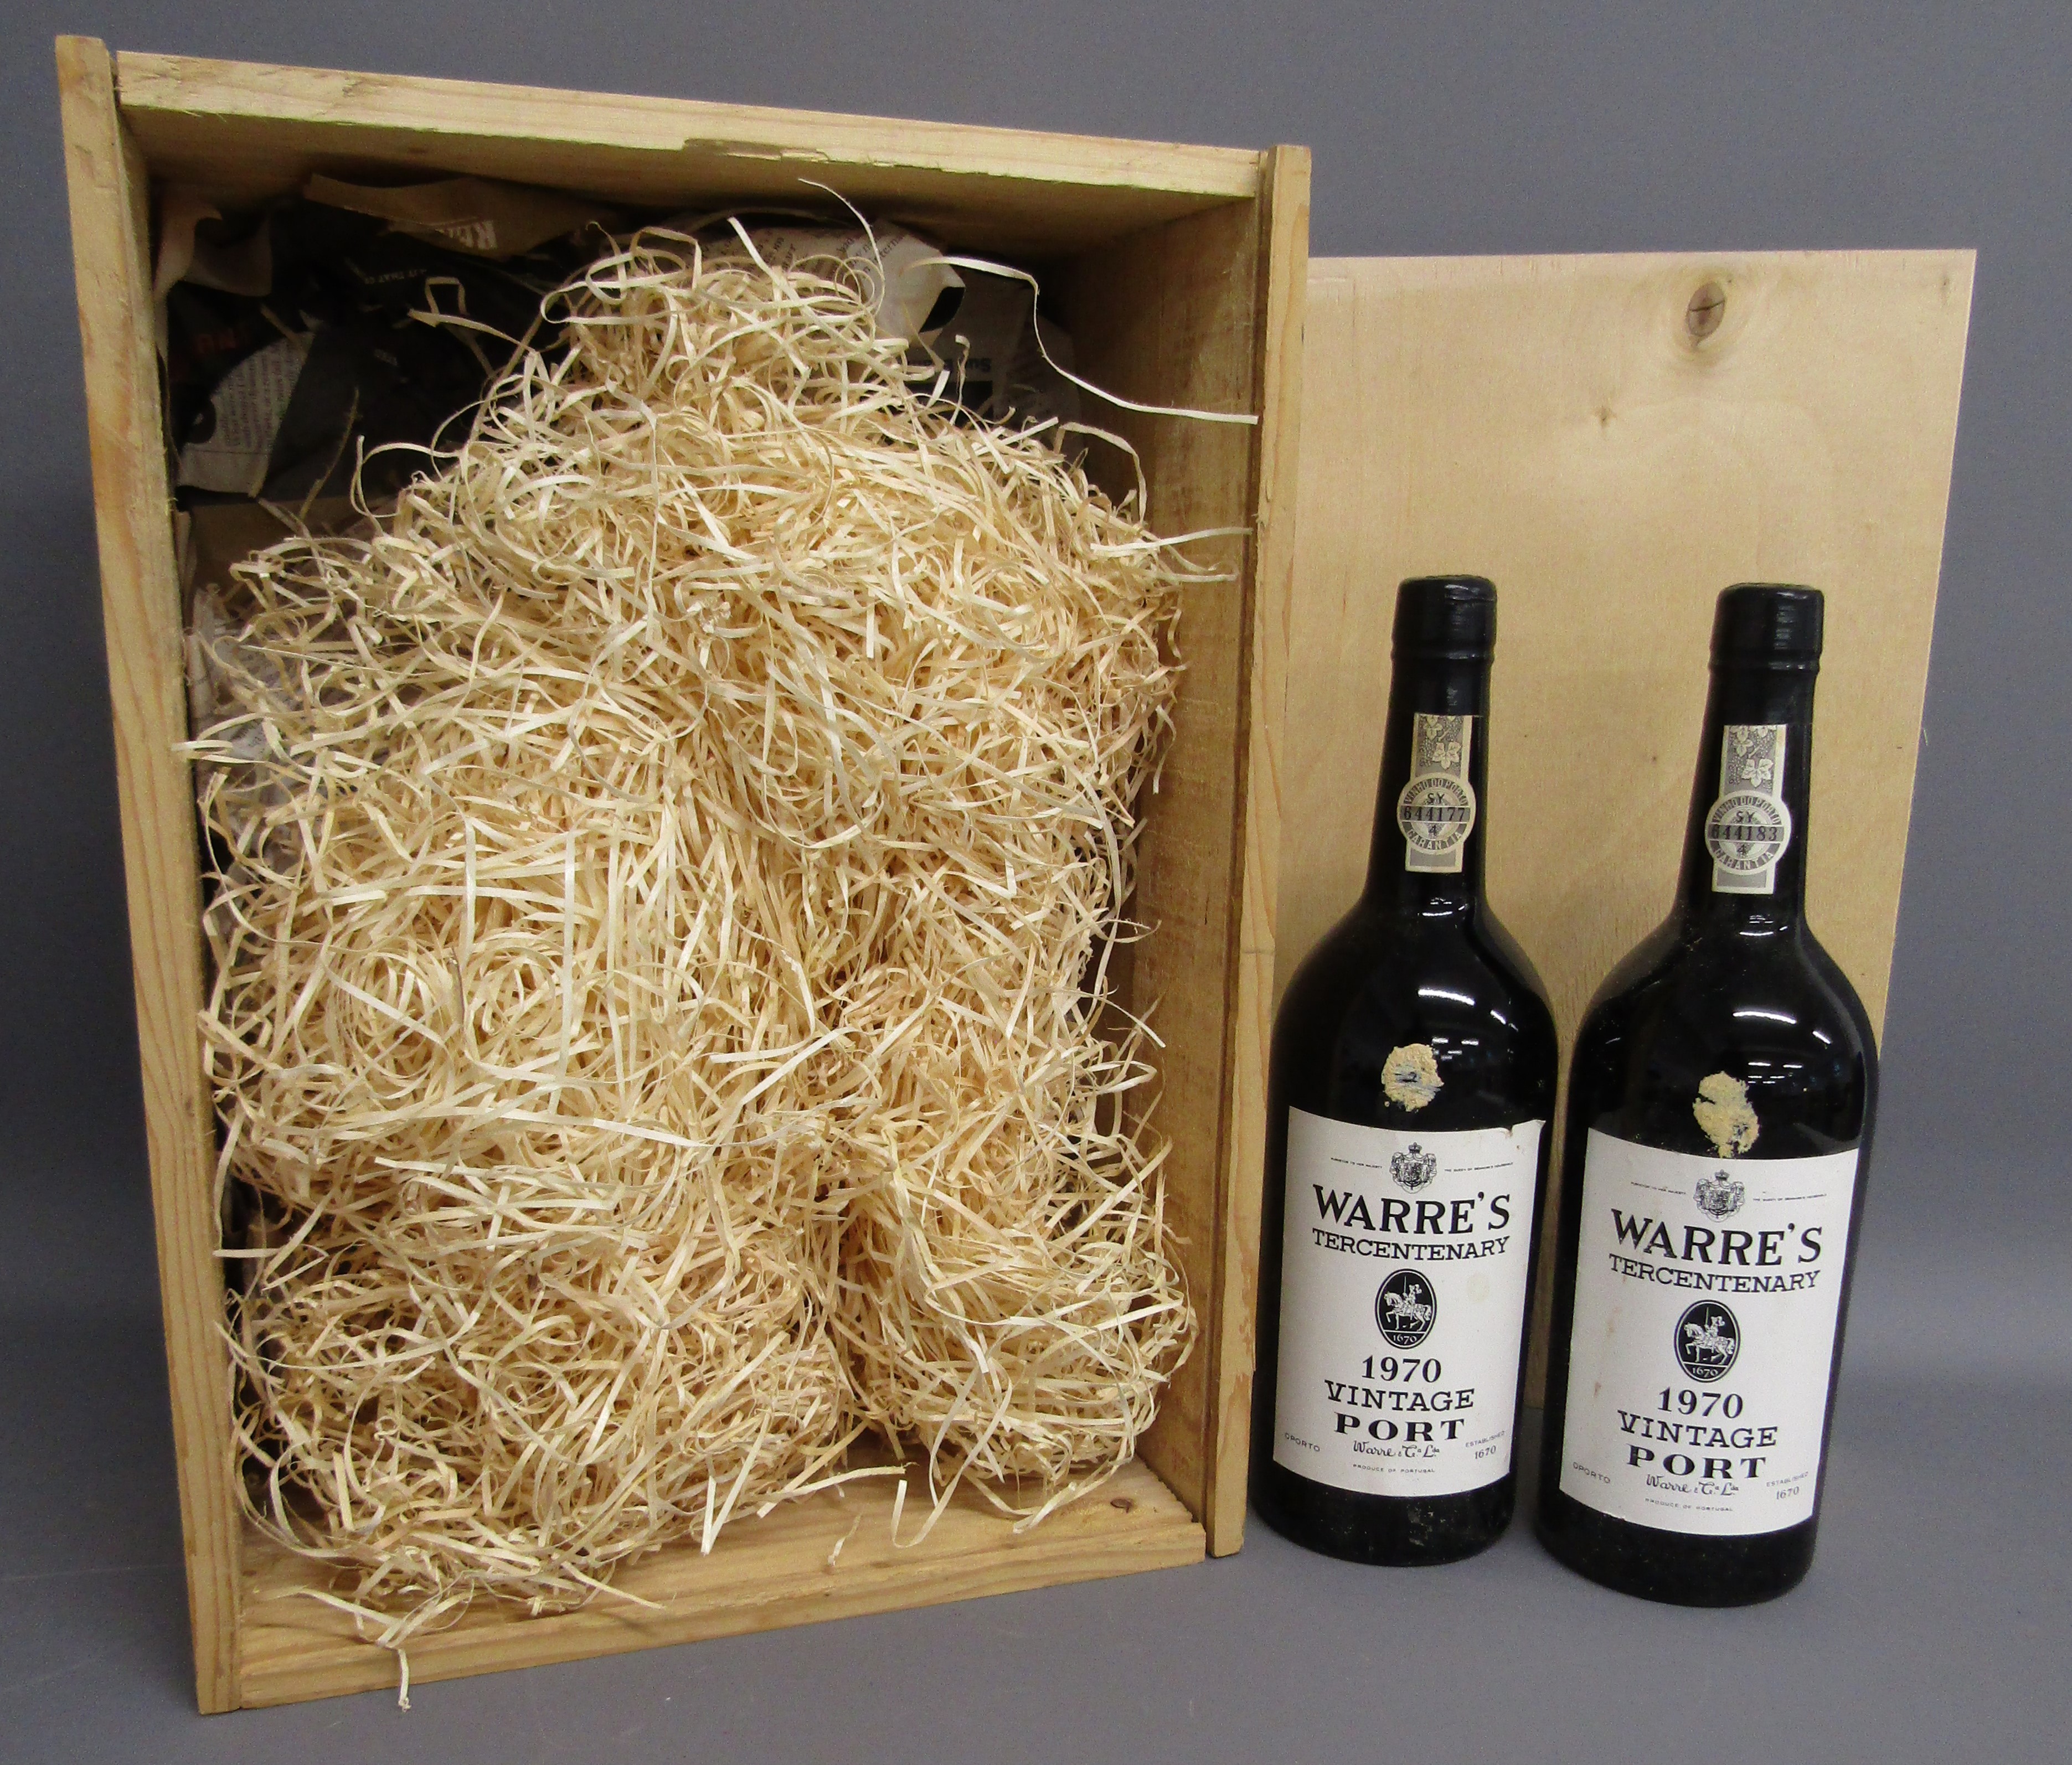 2 bottles of Warre's 1970 Tercentenary vintage Port still with wax seals intact and wooden crate